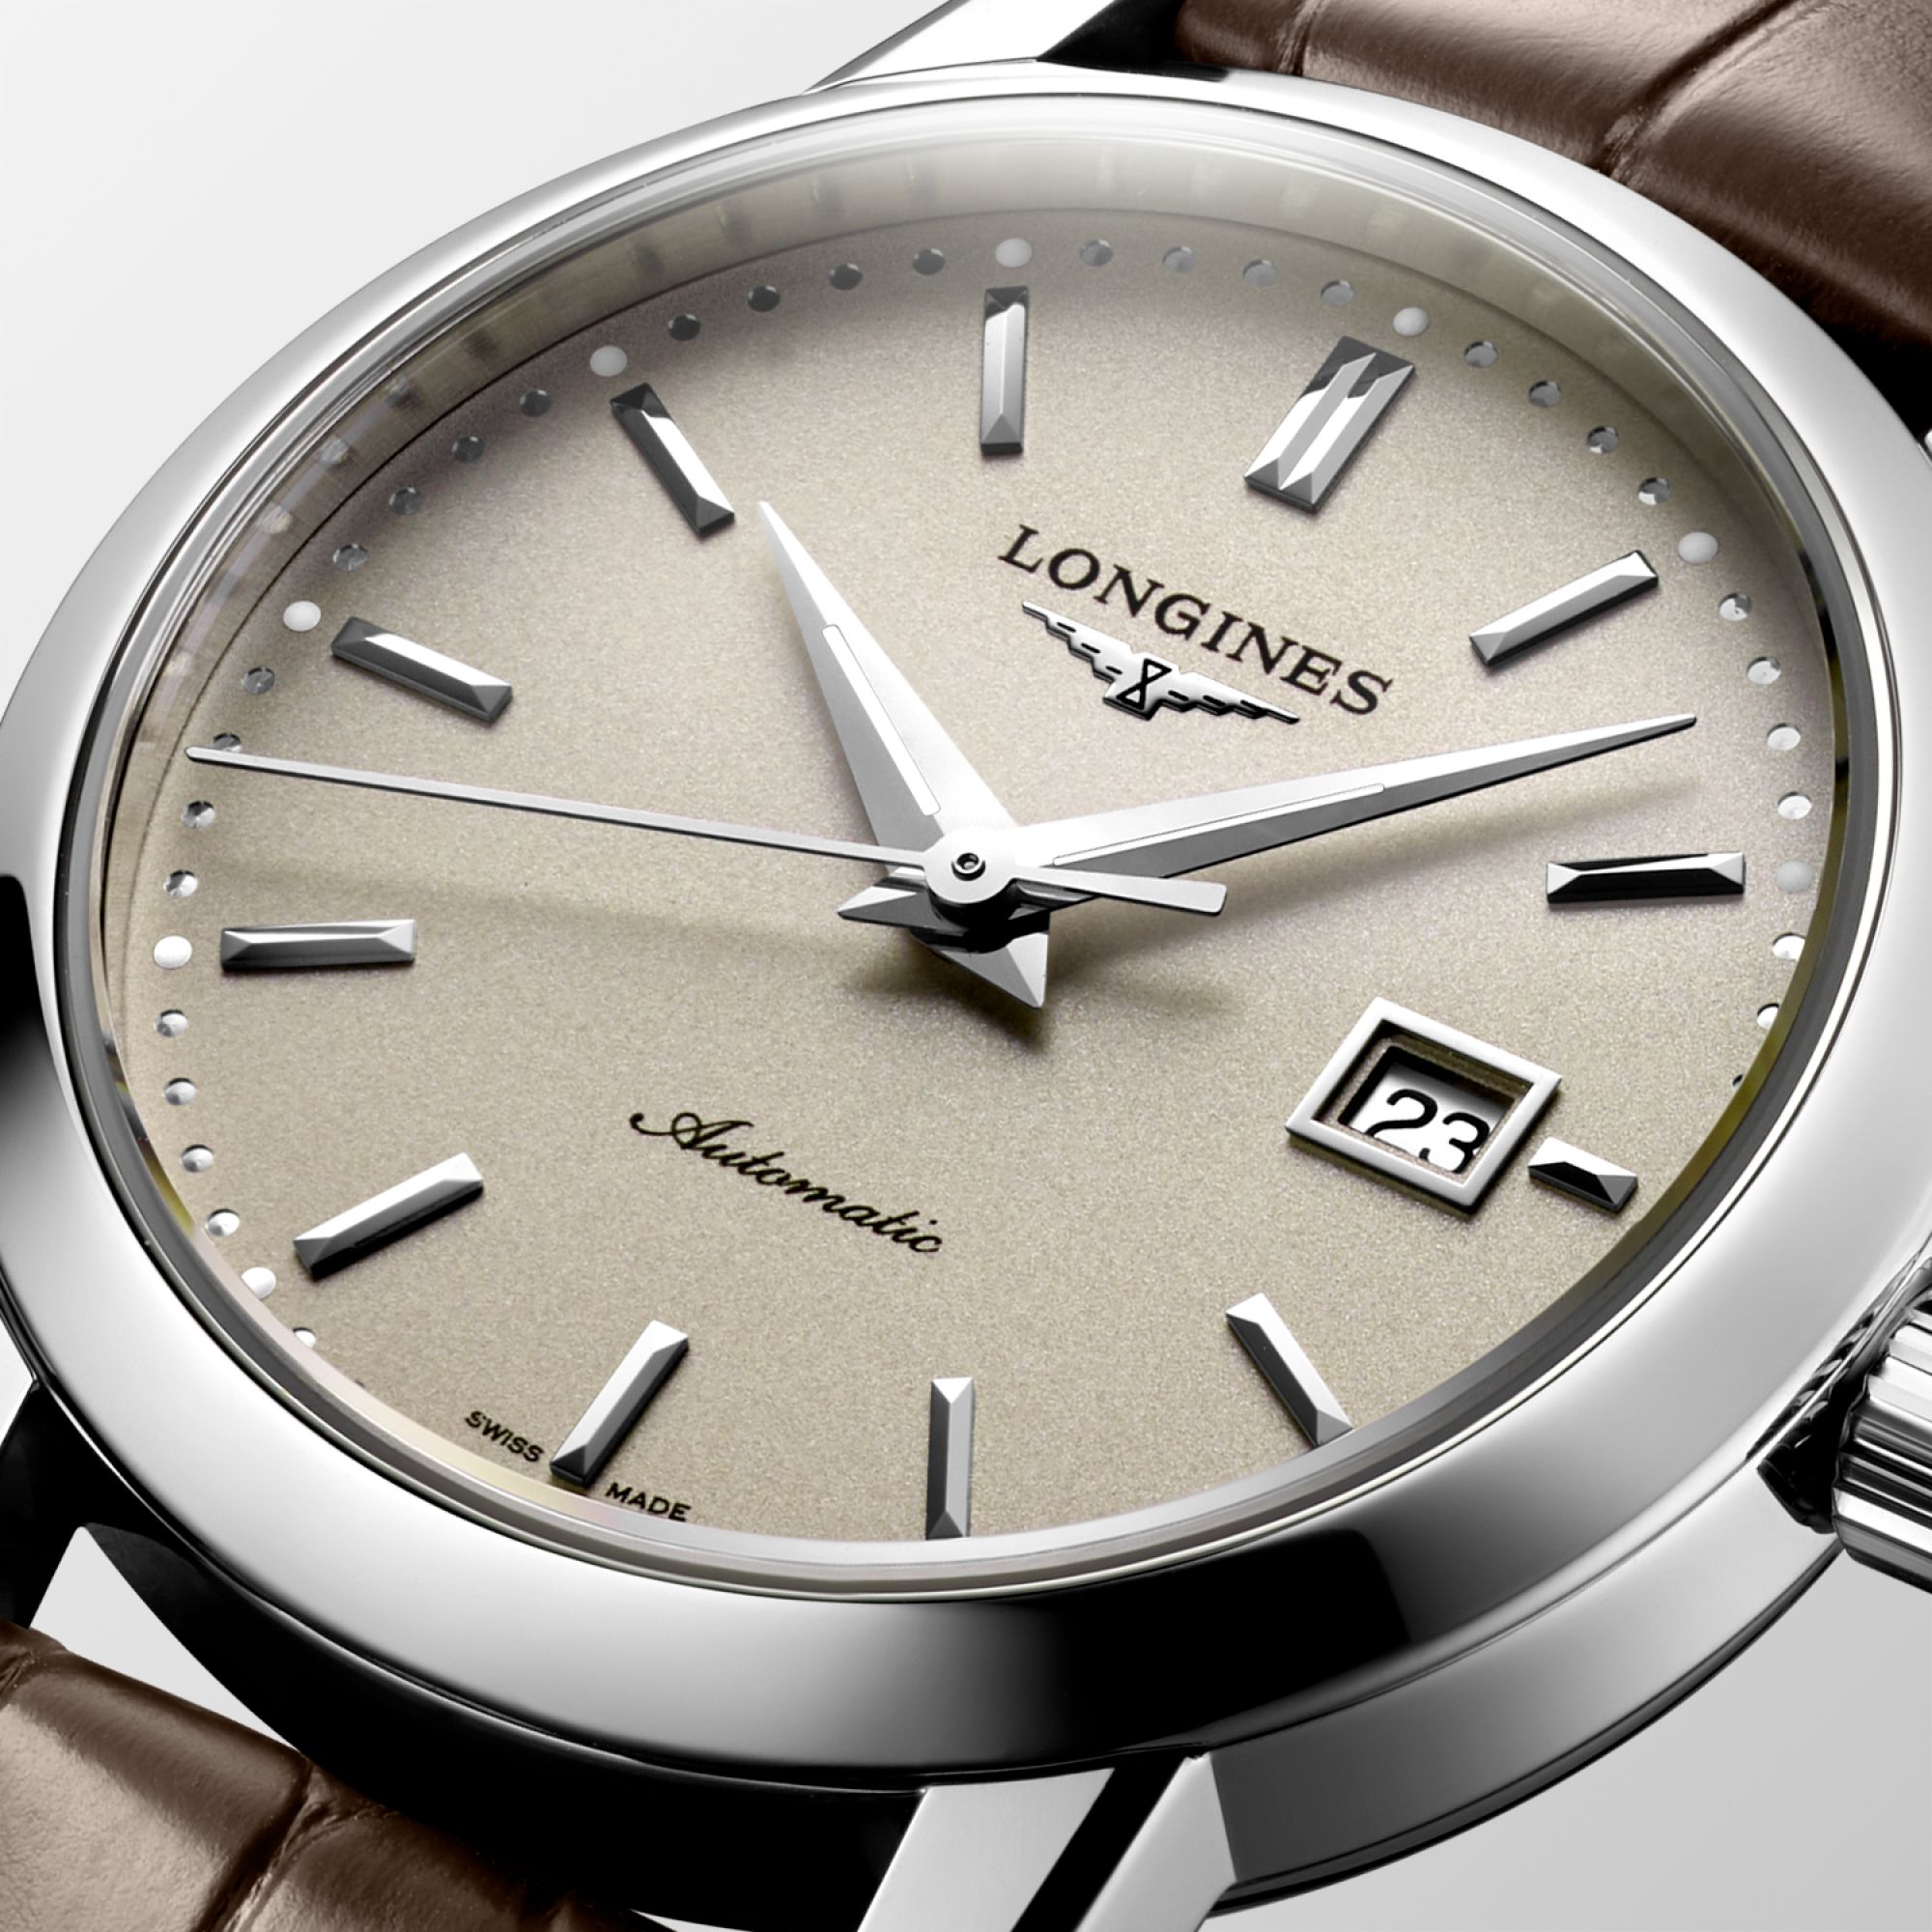 The Longines 1832 Watchmaking Tradition Référence :  L4.325.4.92.2 -4